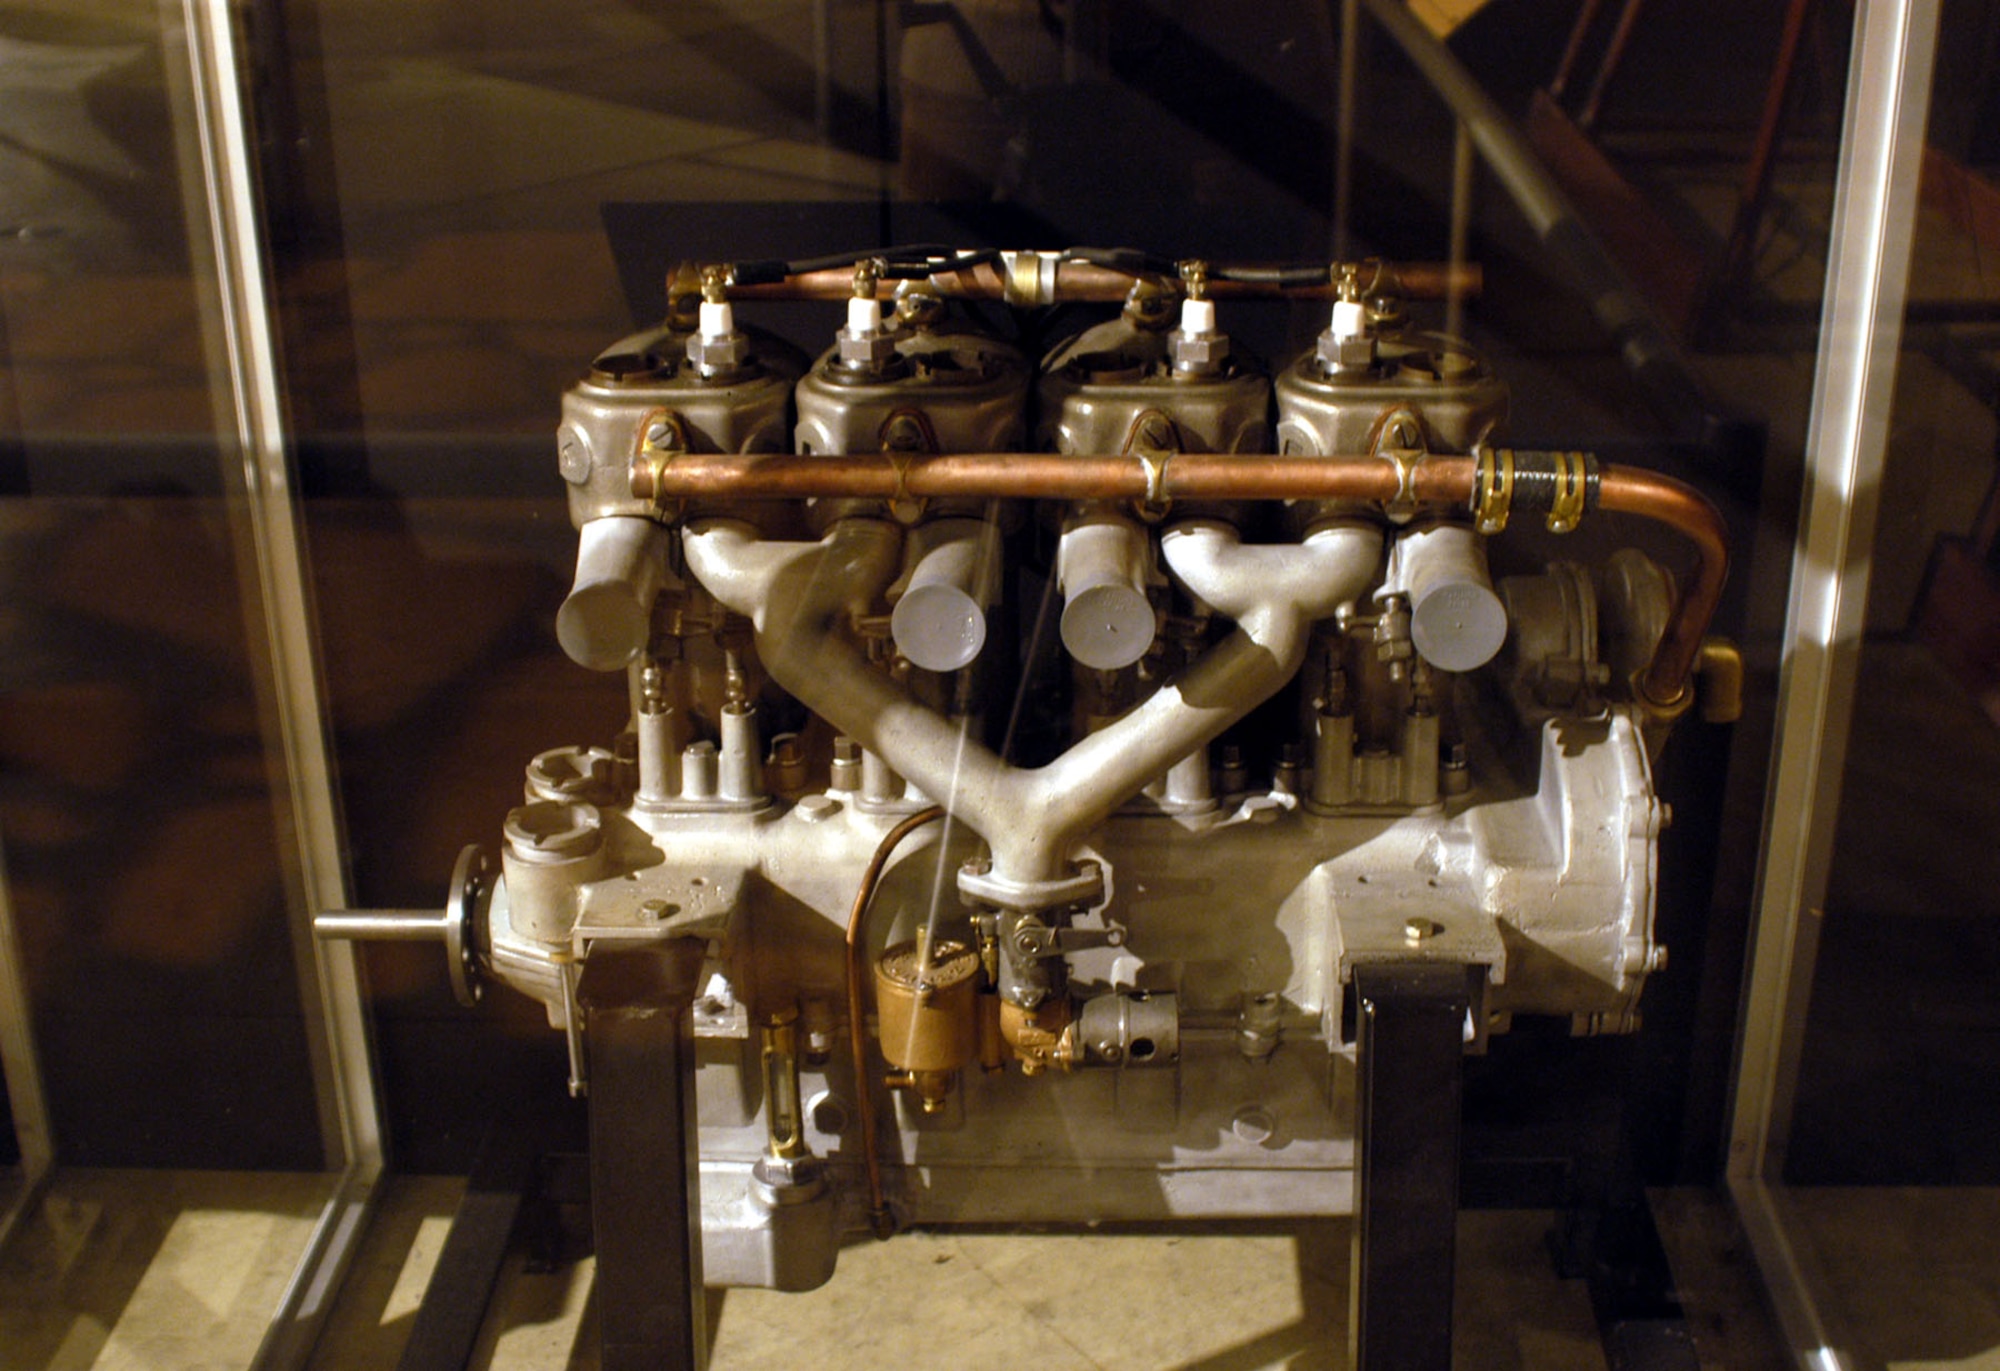 DAYTON, Ohio -- Kirkham 4-cylinder engine on display in the Early Years Gallery at the National Museum of the United States Air Force. (U.S. Air Force photo)